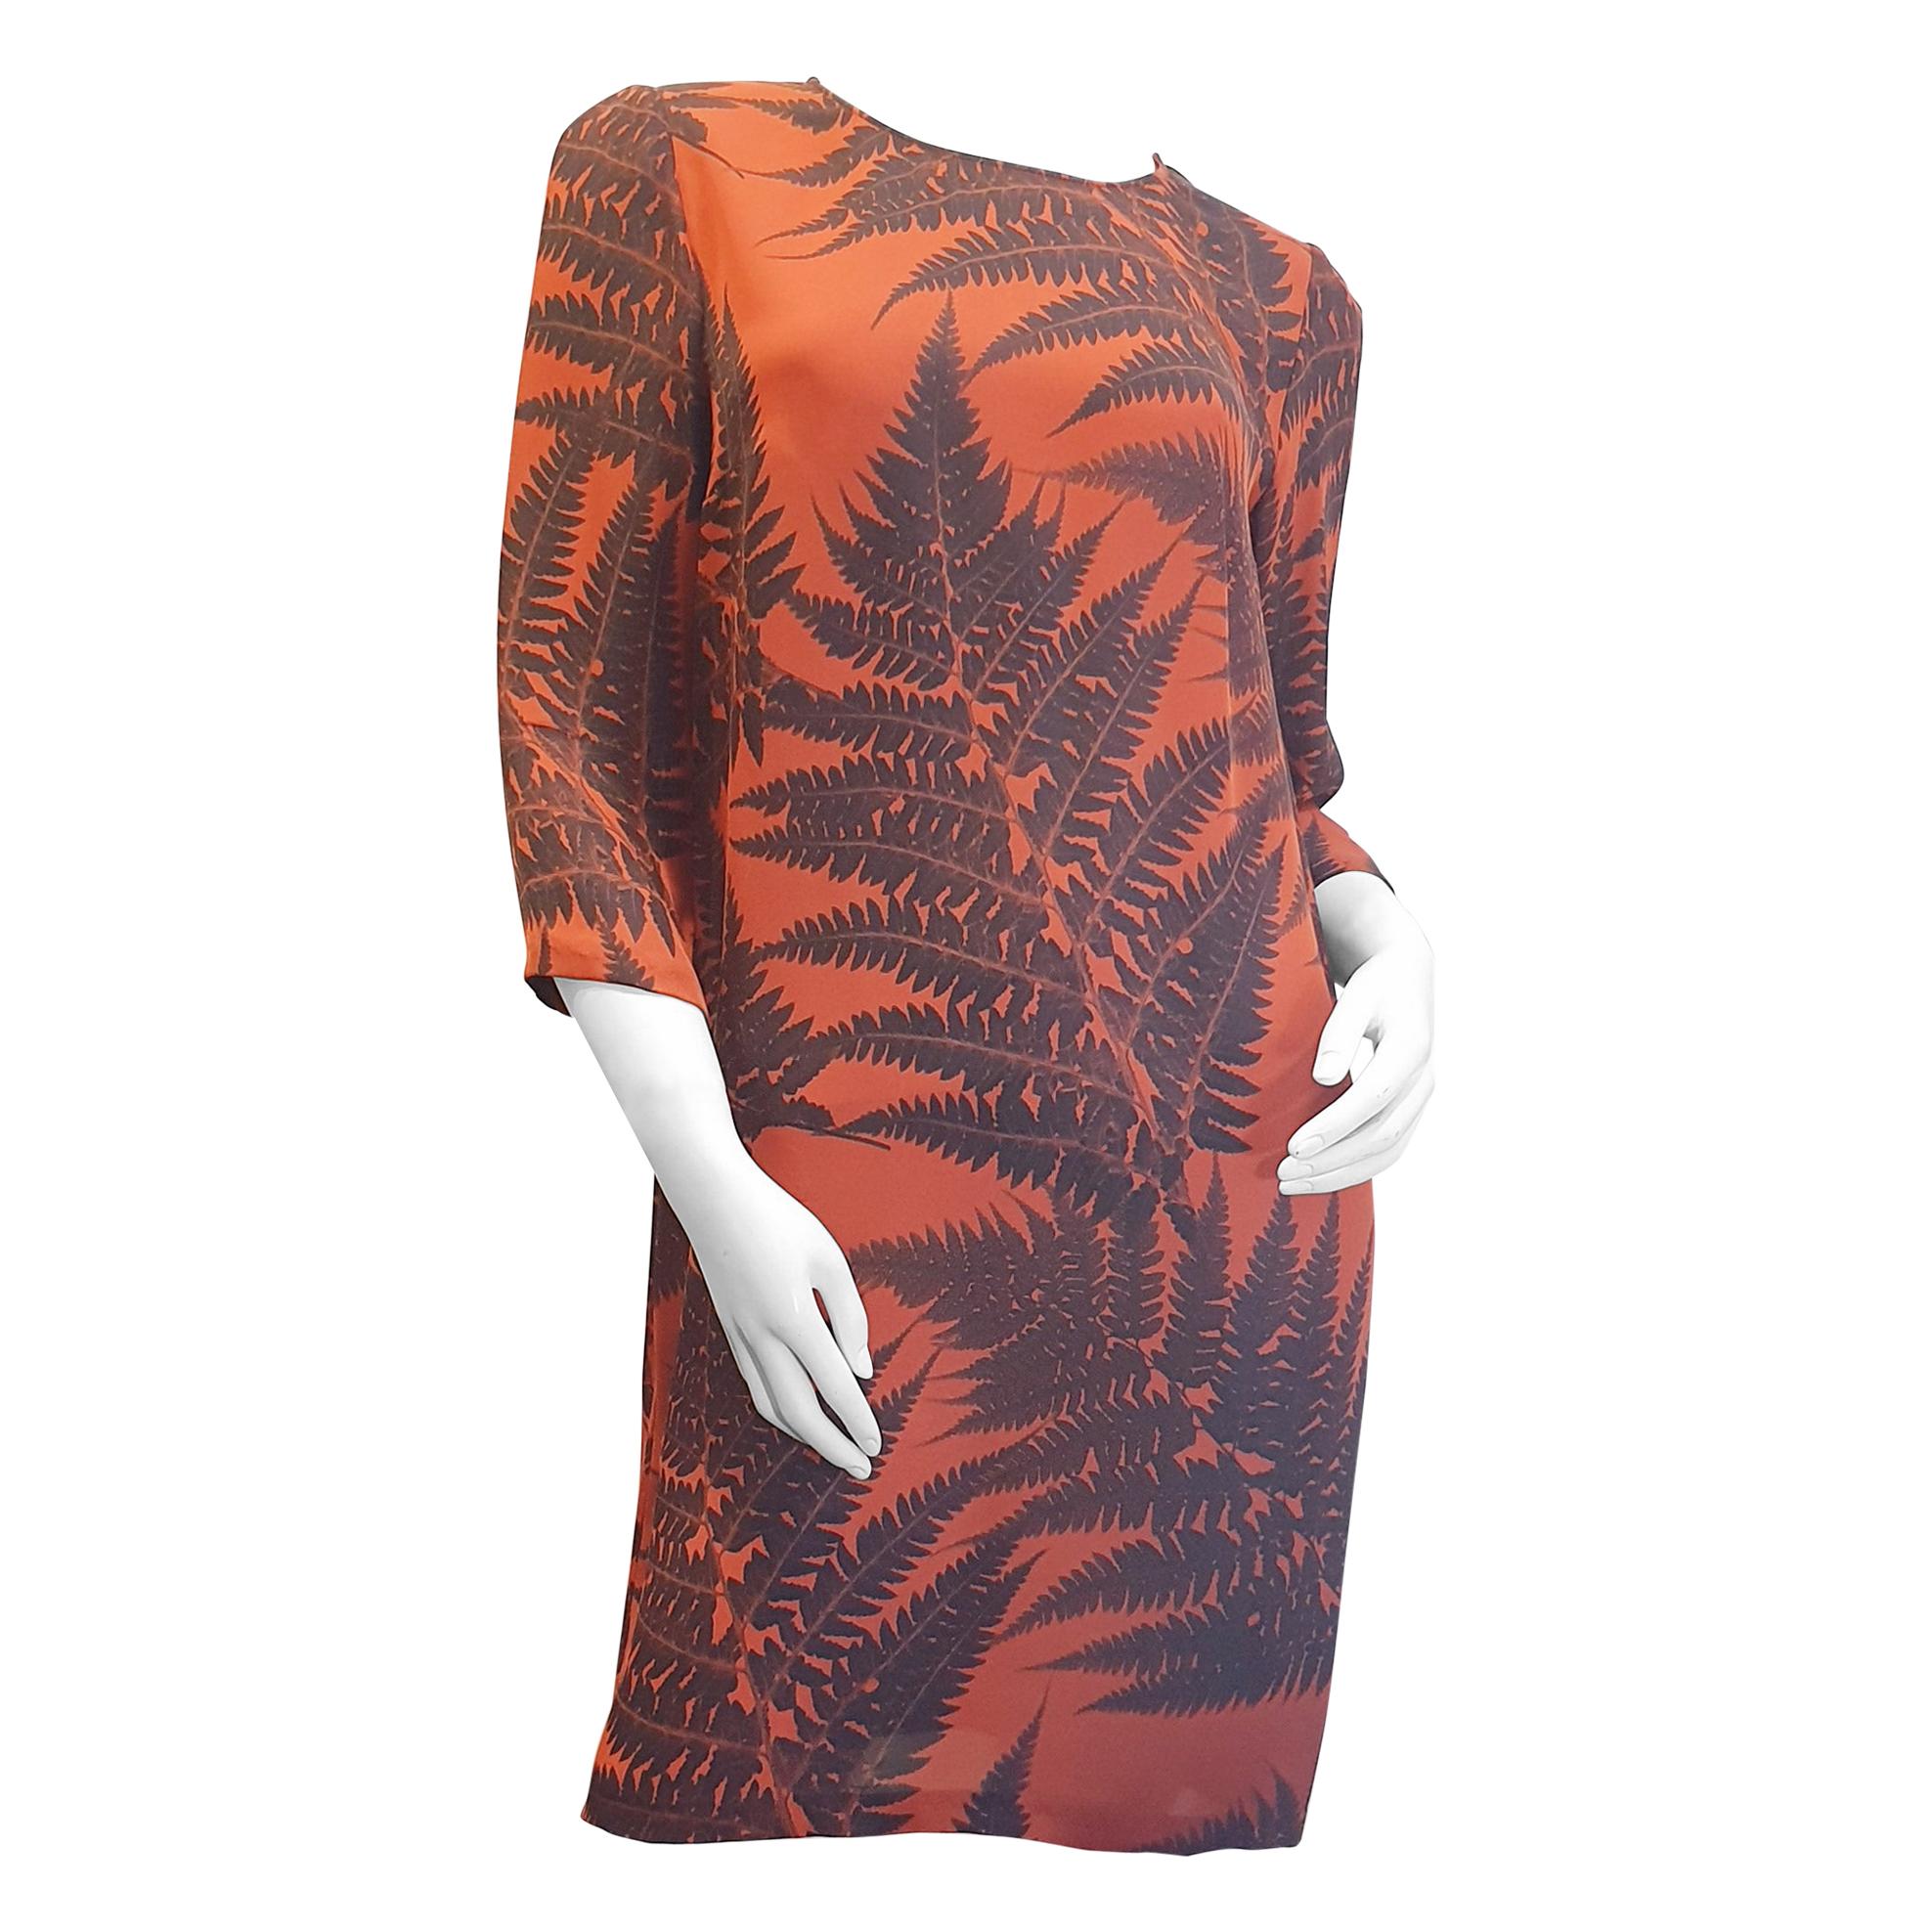 Stella McCartney silk tropical plant cocktail dress in Orange and marron colours